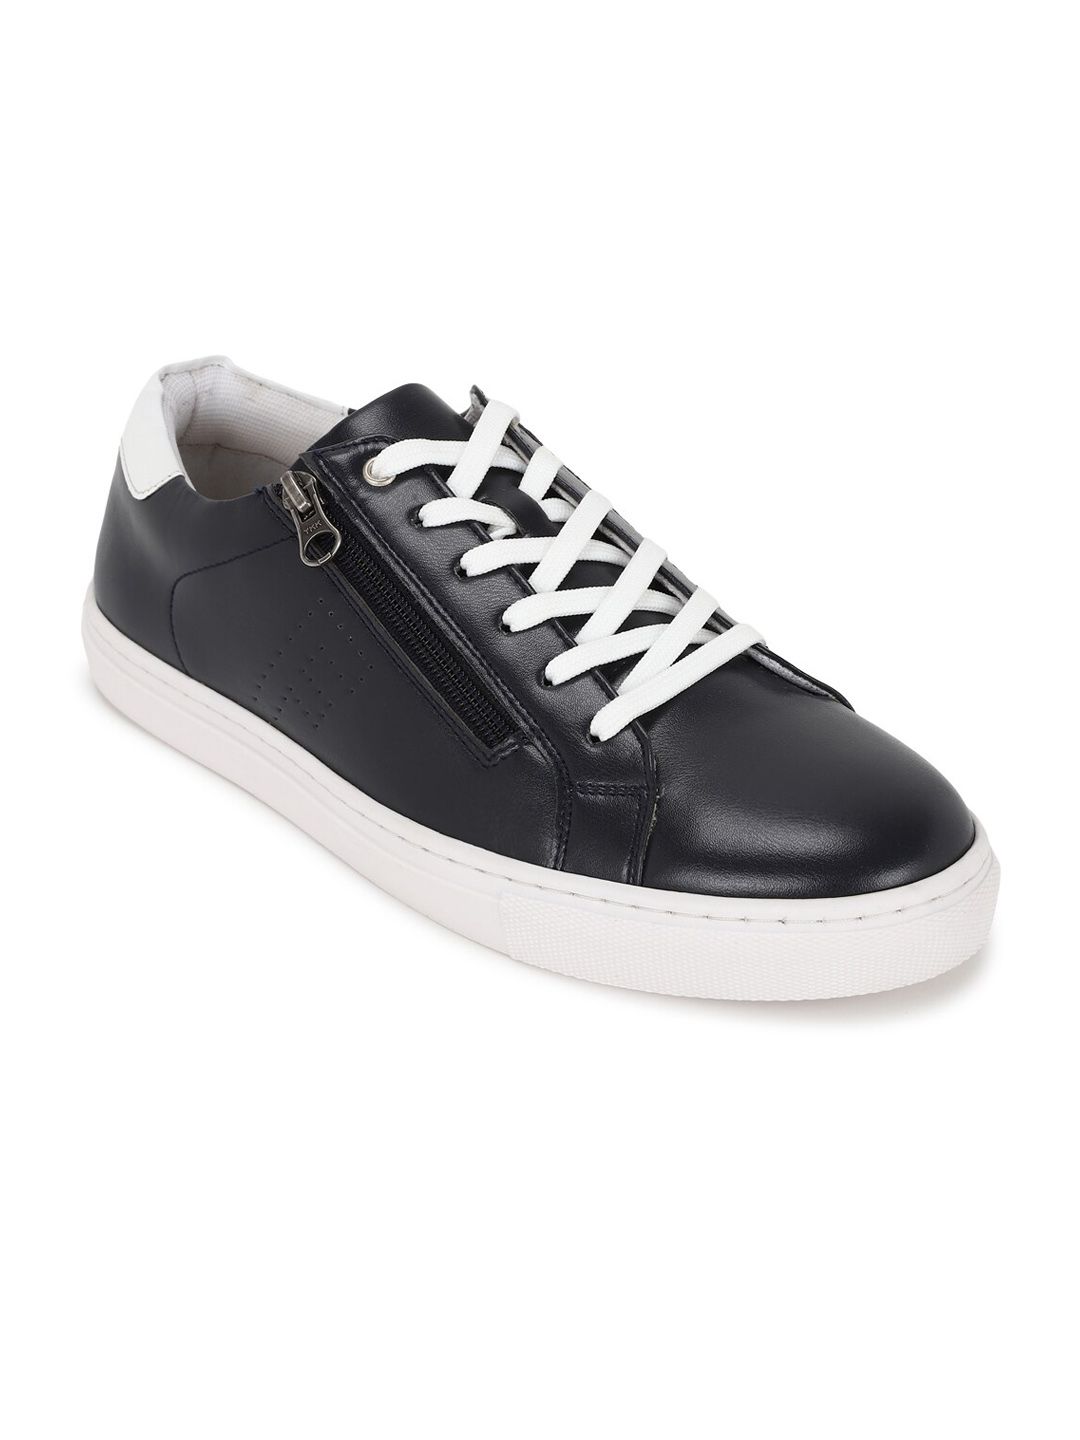 FOREVER 21 Women Black & White Sneakers Price in India